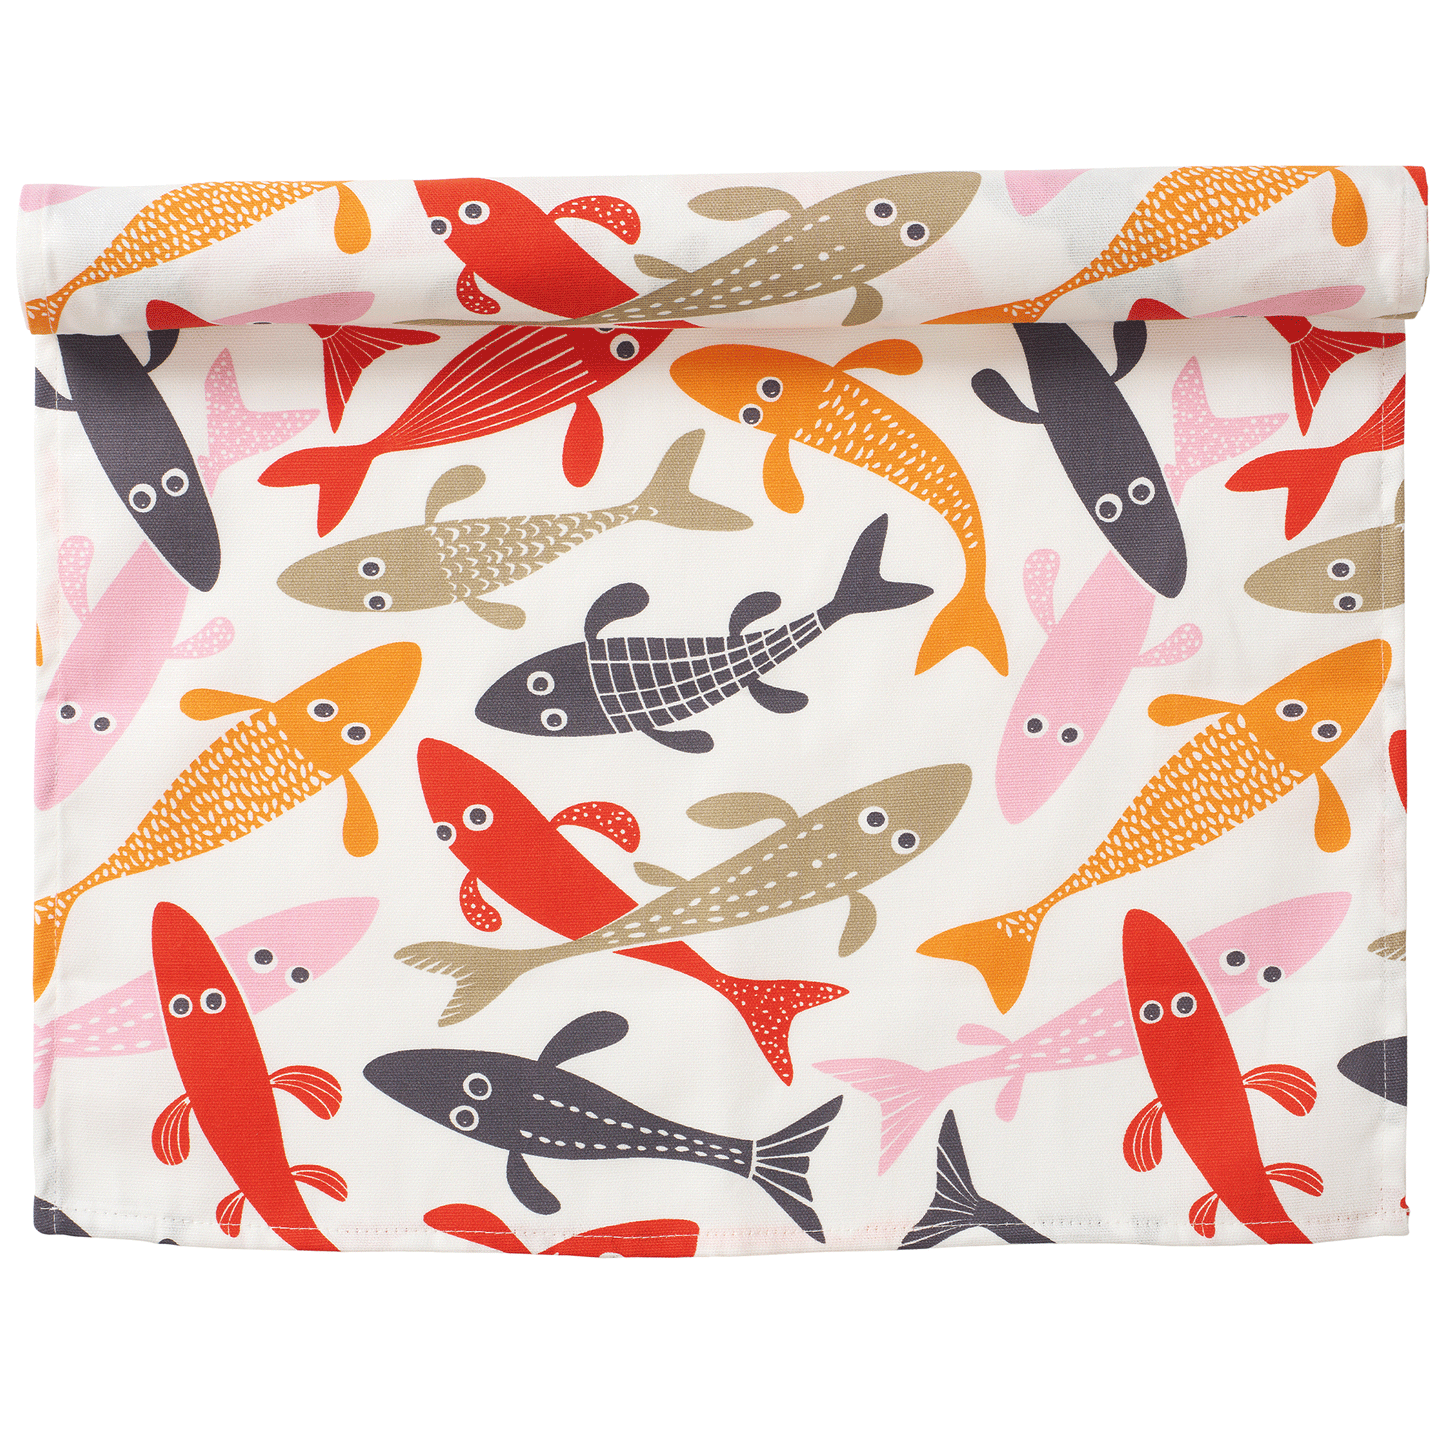 The Pond Cotton Table Runner 45x150cm